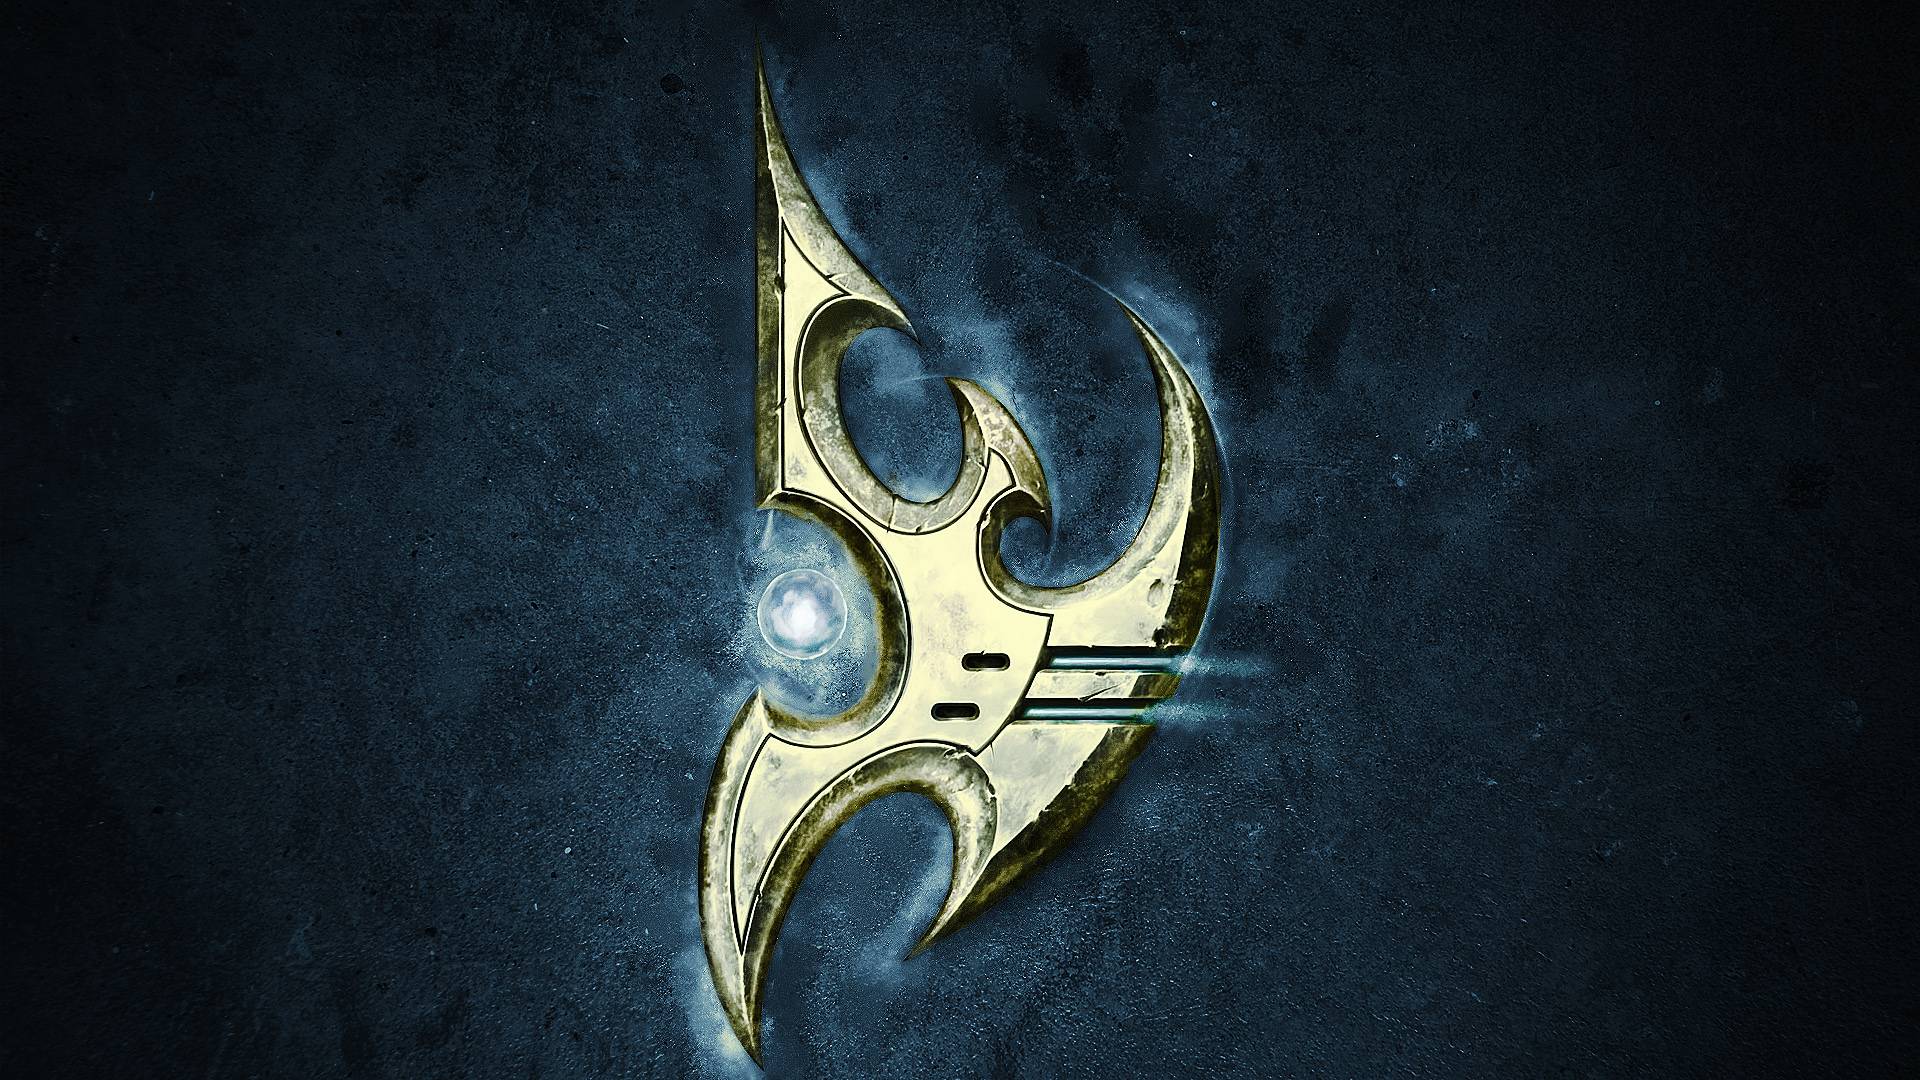 Starcraft Protoss Wallpaper HD Posted By Ethan Sellers